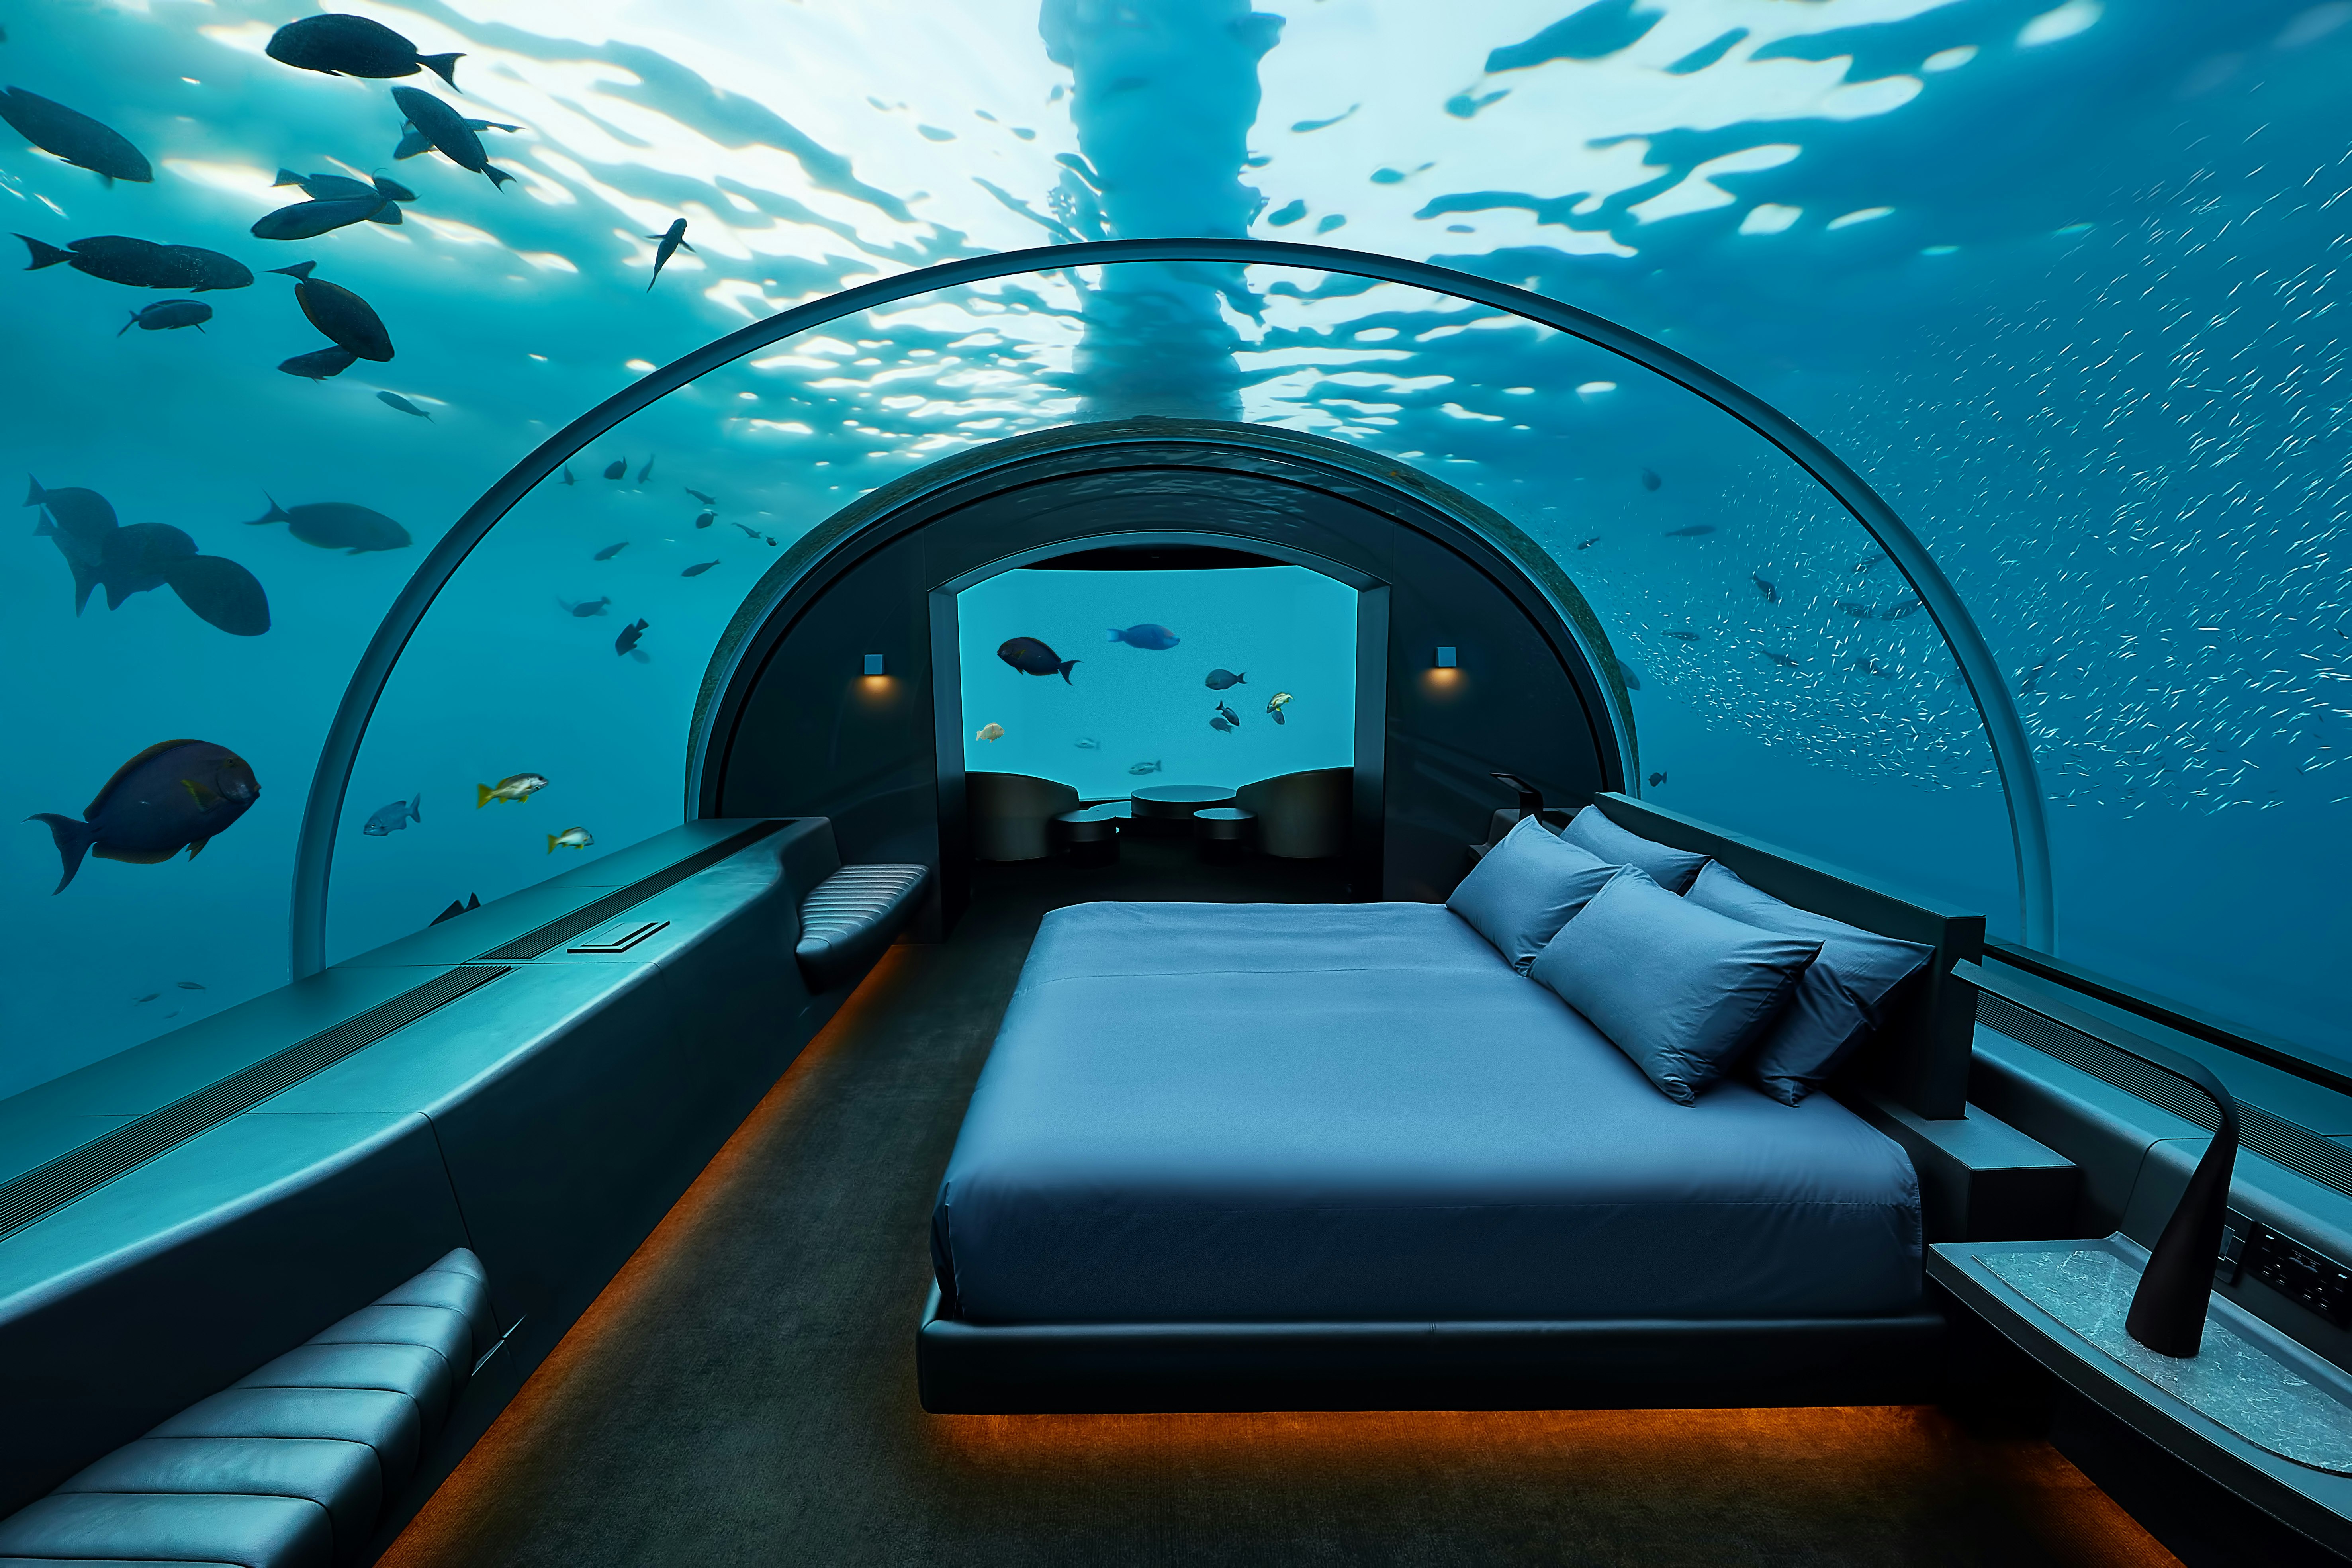 A transparent perspex dome encloses an underwater hotel room, and large tropical fish can be seen swimming beyond its see-through walls.